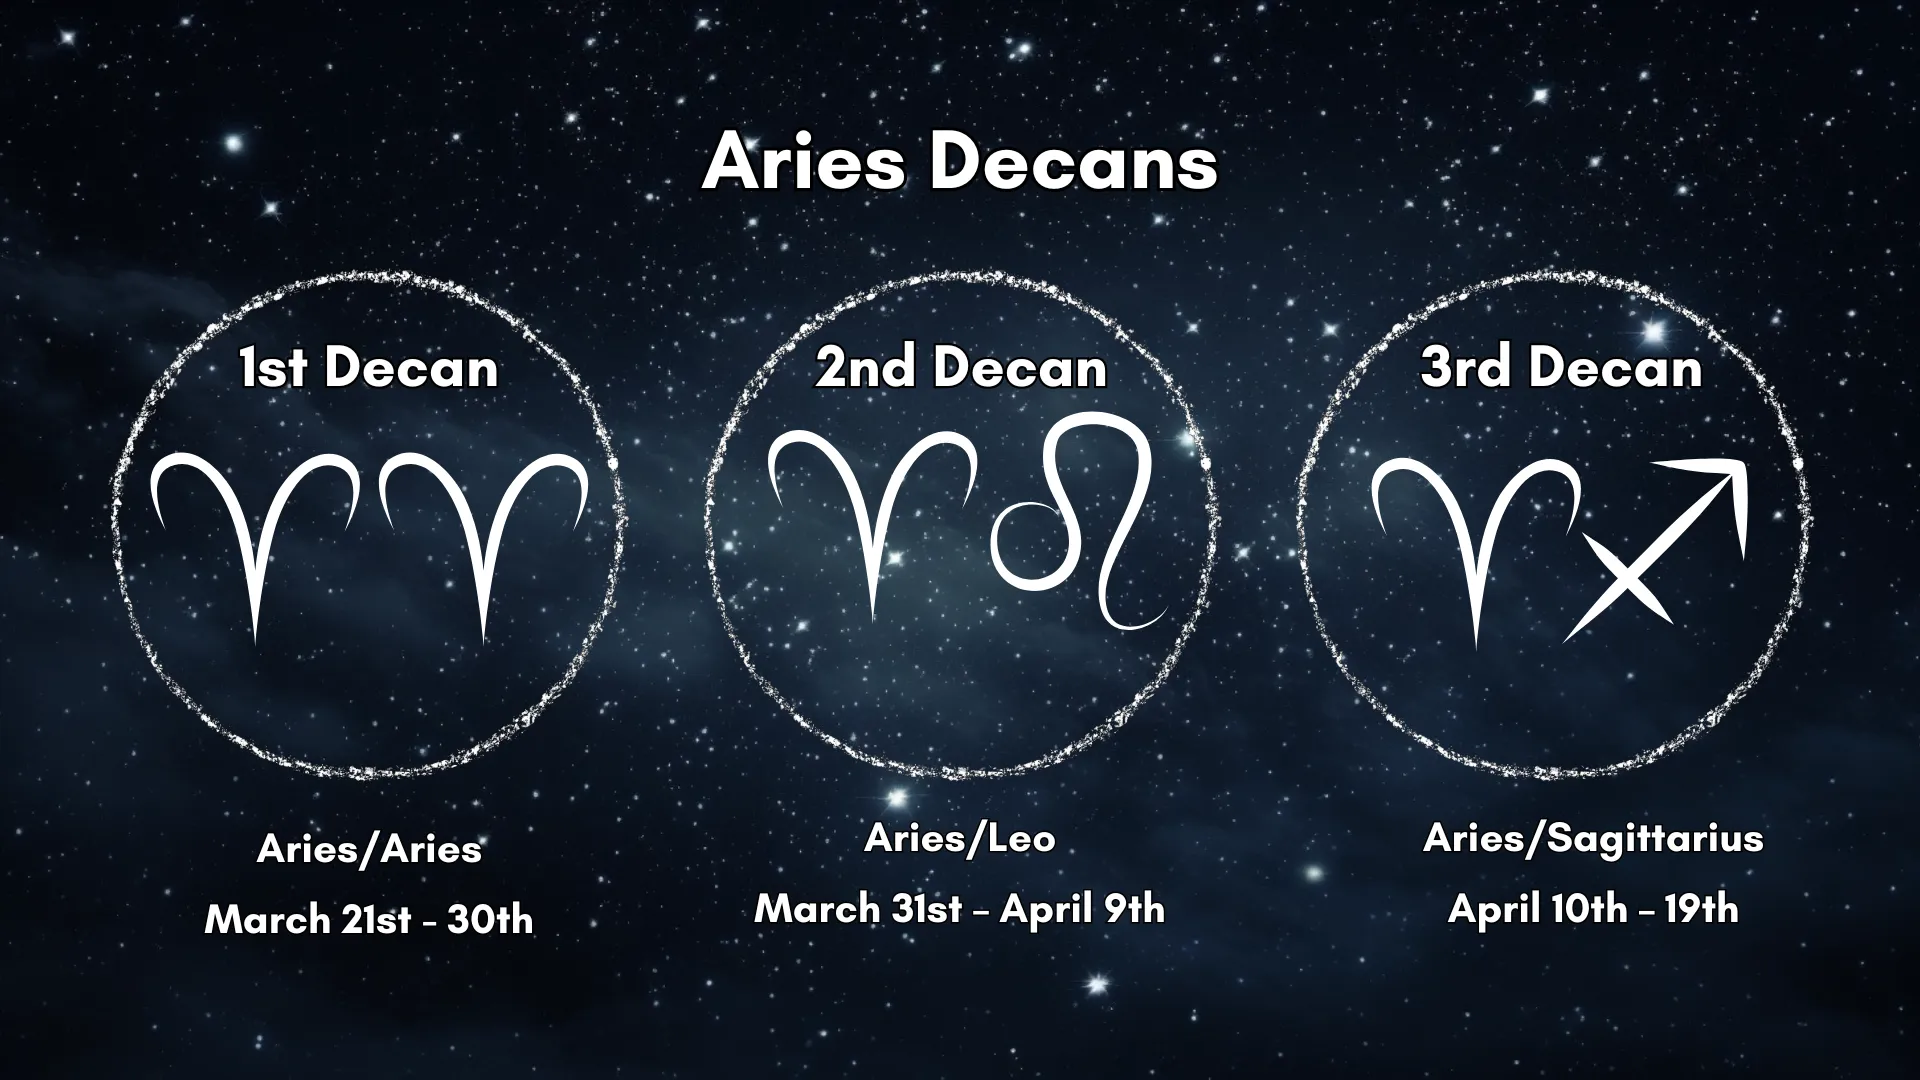 The Aries Decans are laid out in a chart that is easy to understand.